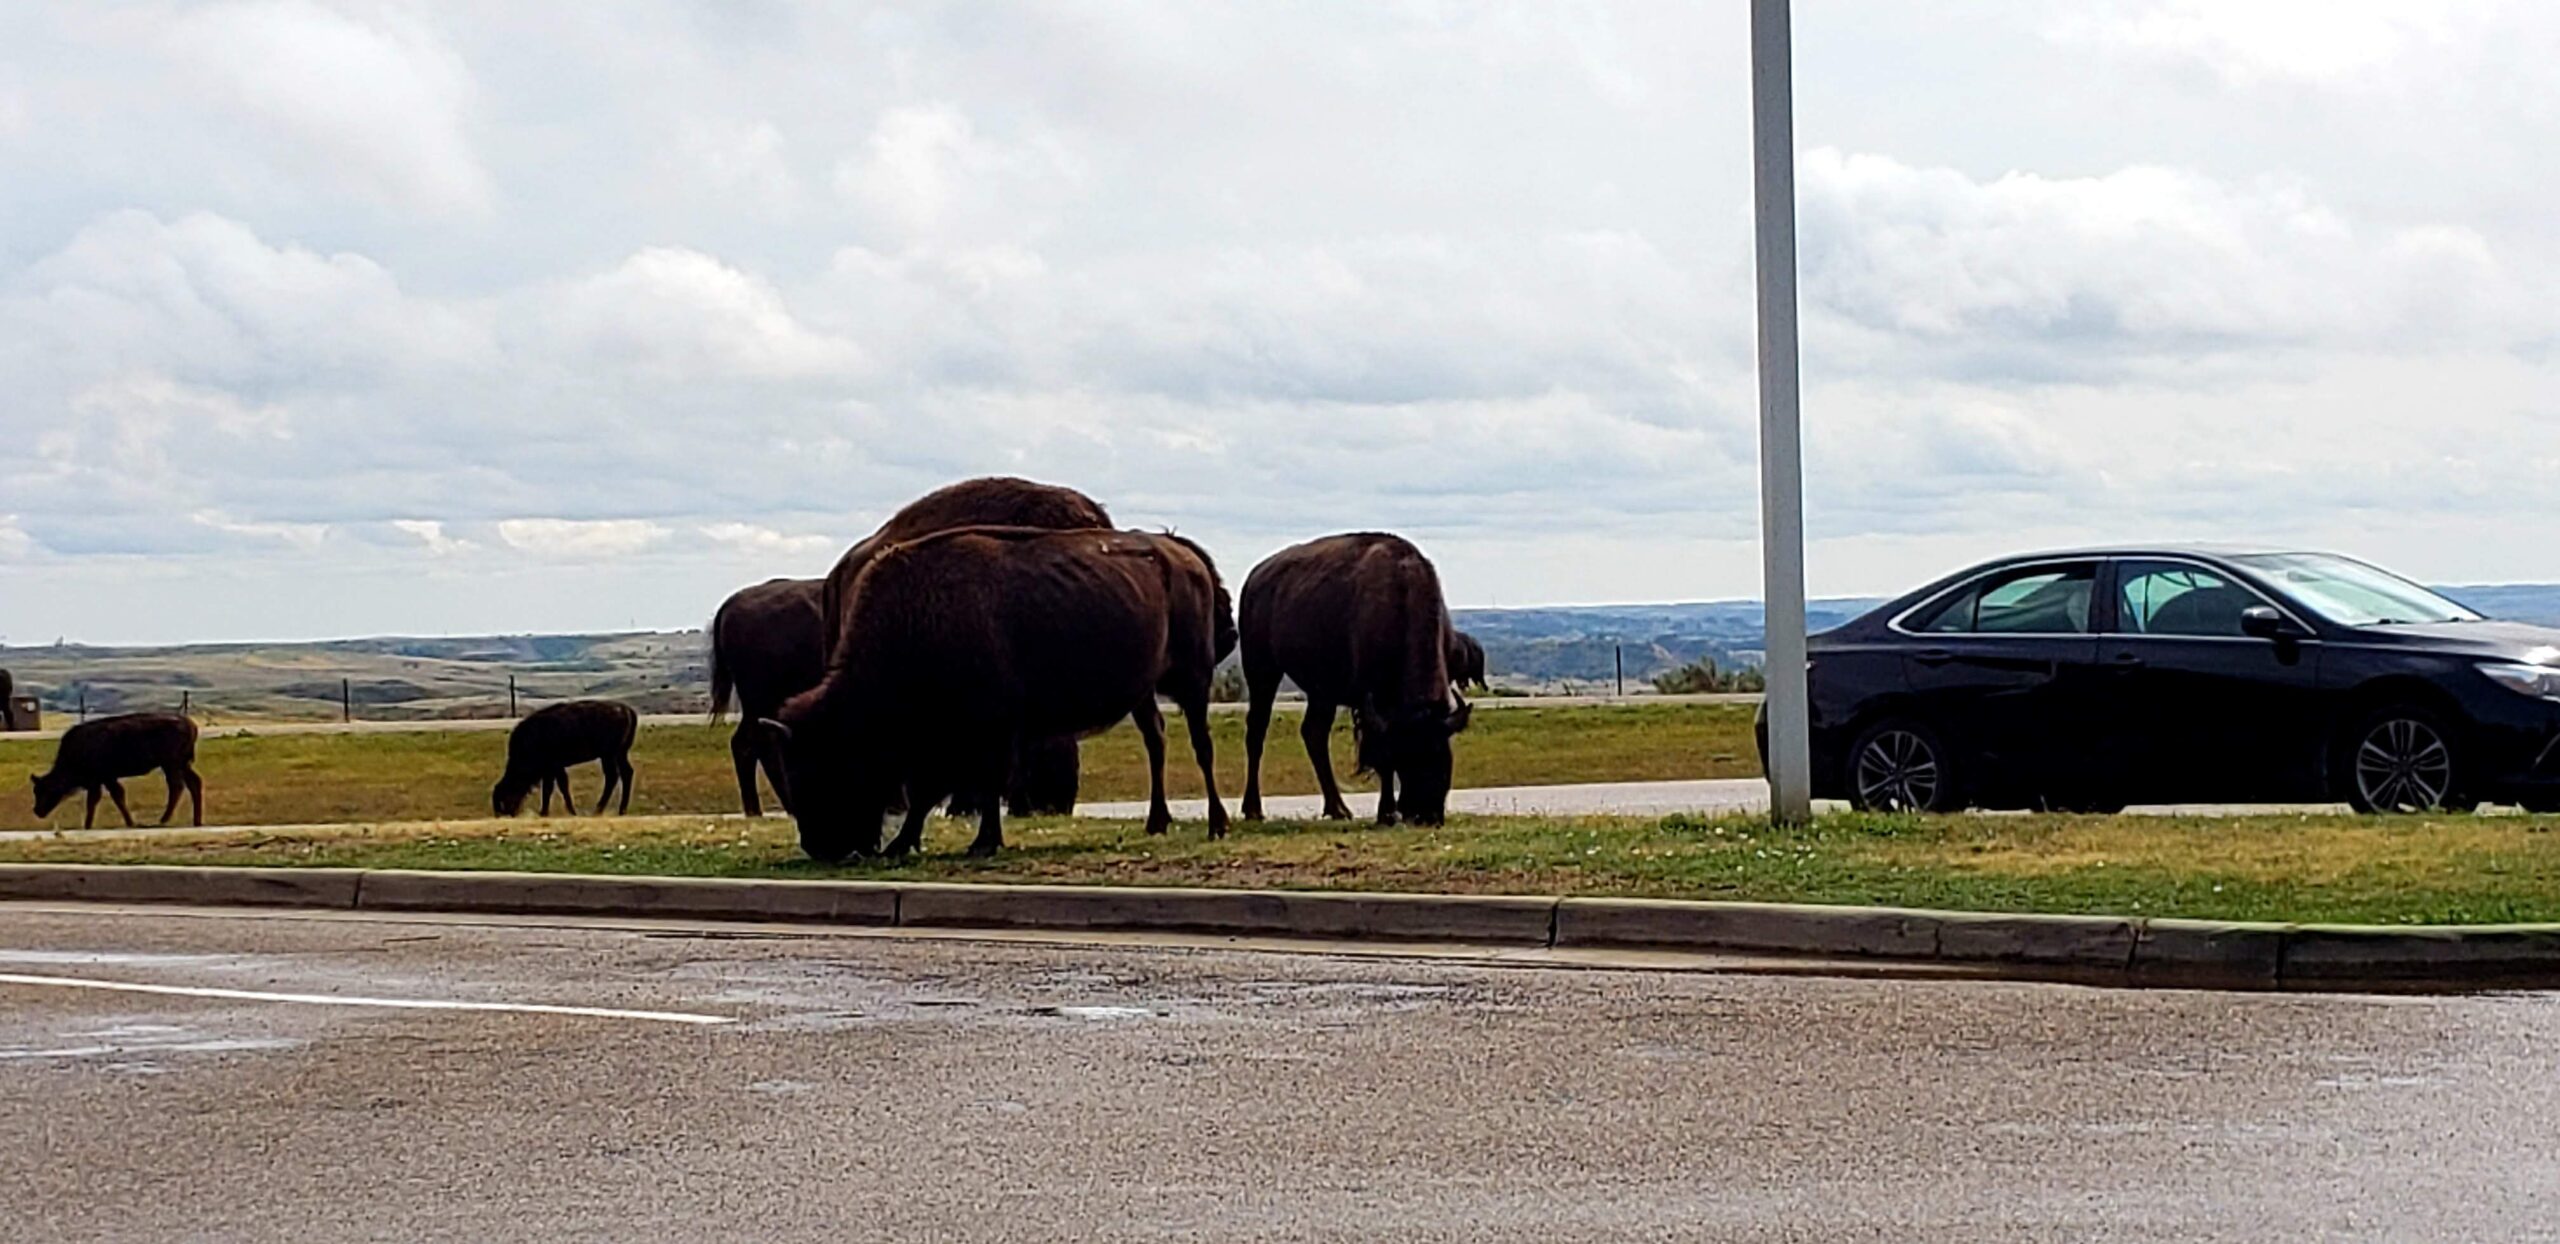 Buffalo in visitor center parking lot